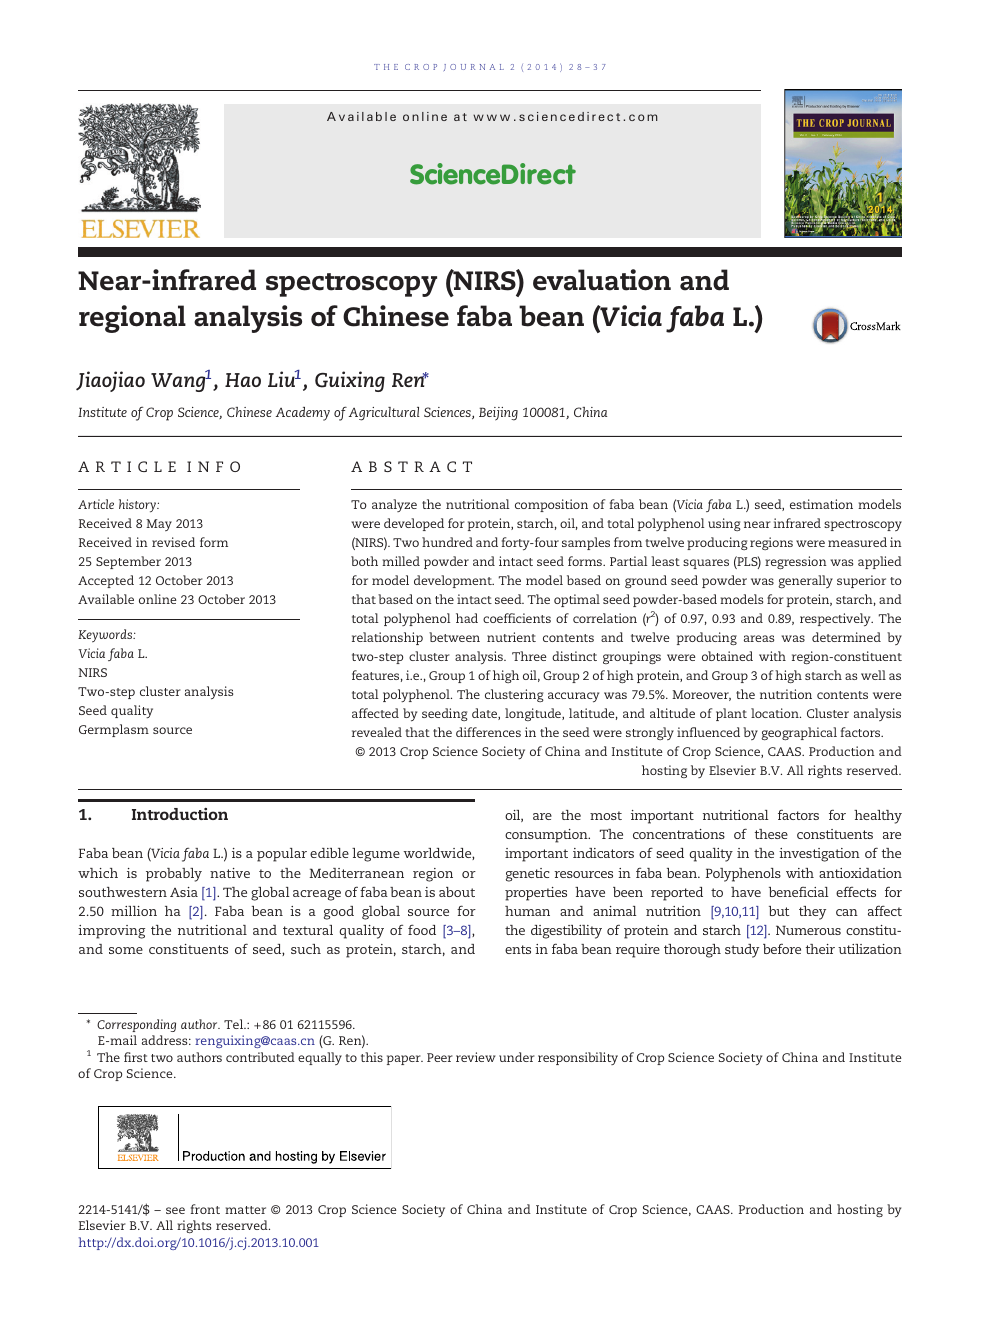 Near Infrared Spectroscopy Nirs Evaluation And Regional Analysis Of Chinese Faba Bean Vicia Faba L Topic Of Research Paper In Agriculture Forestry And Fisheries Download Scholarly Article Pdf And Read For Free